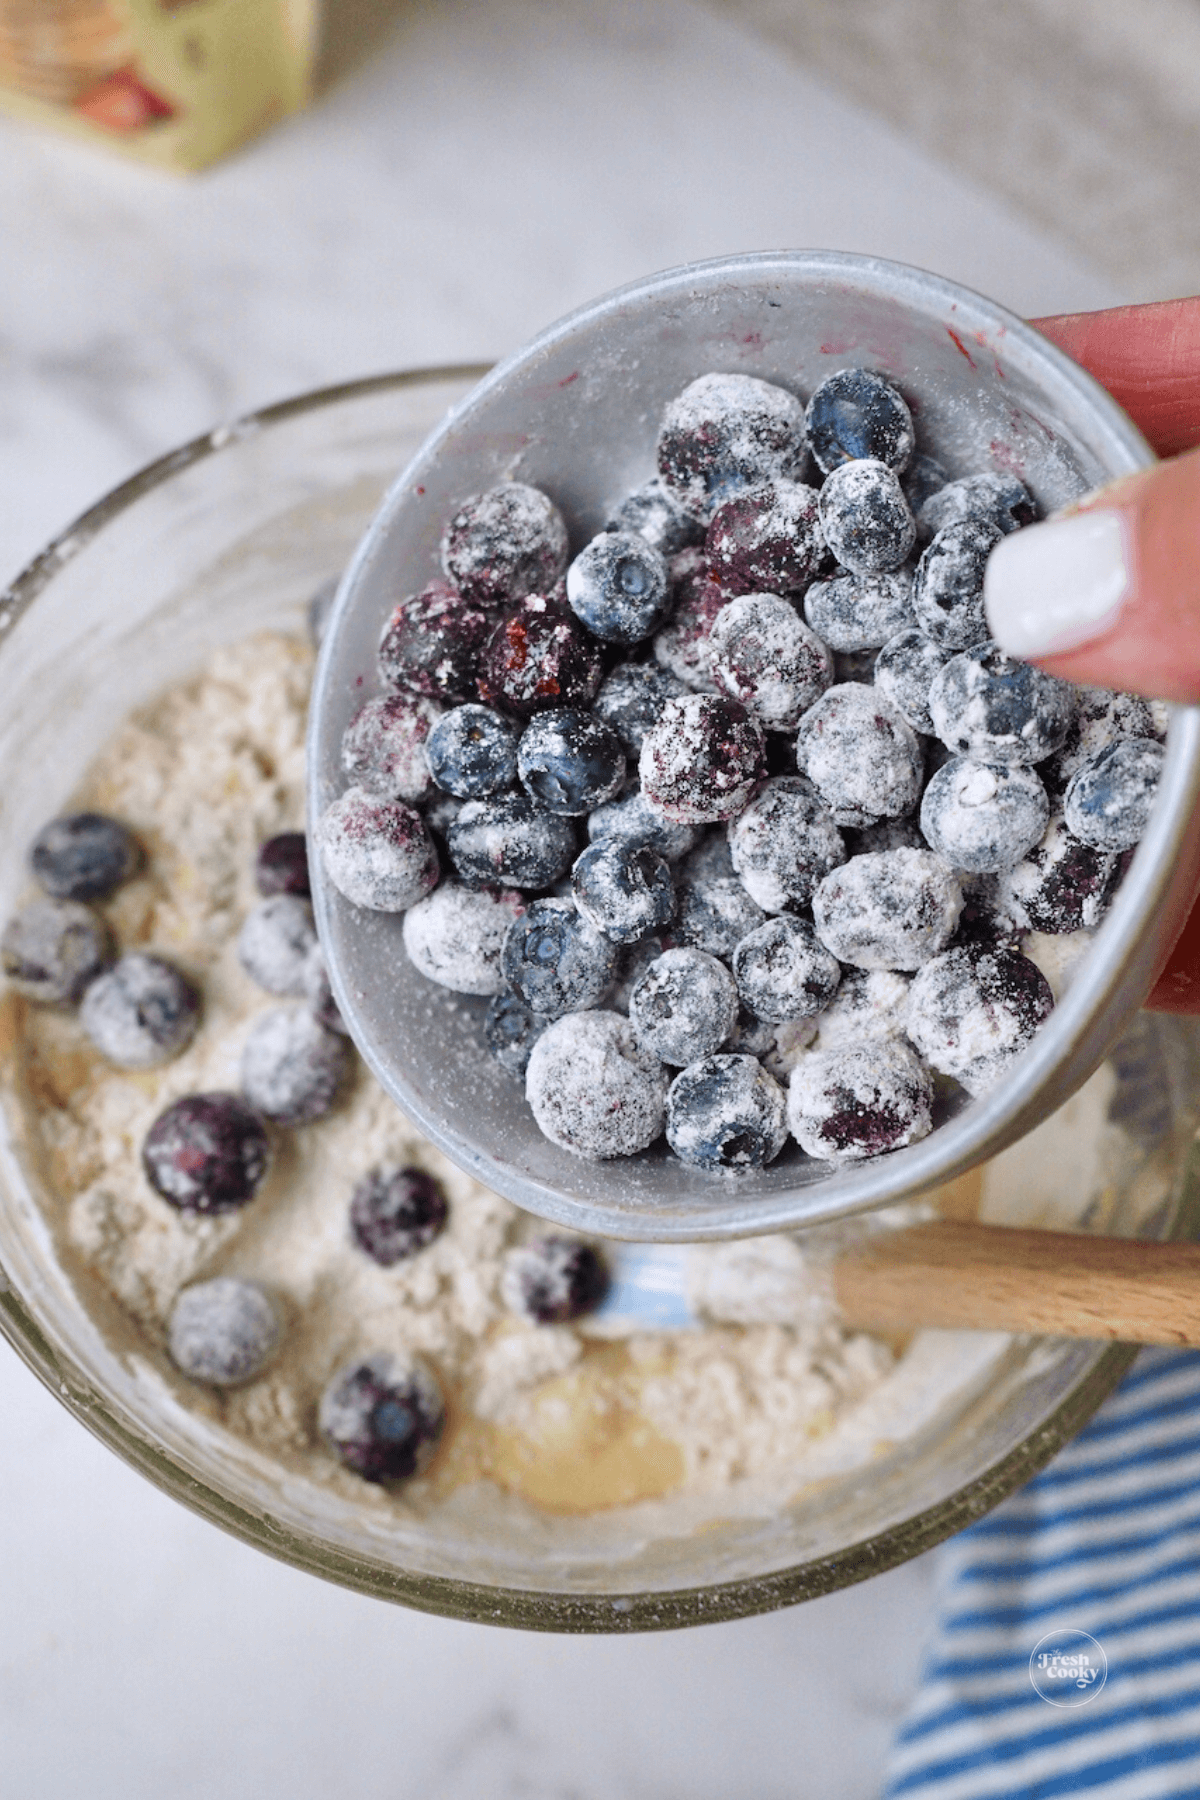 Pouring dusted blueberries into wet batter. 